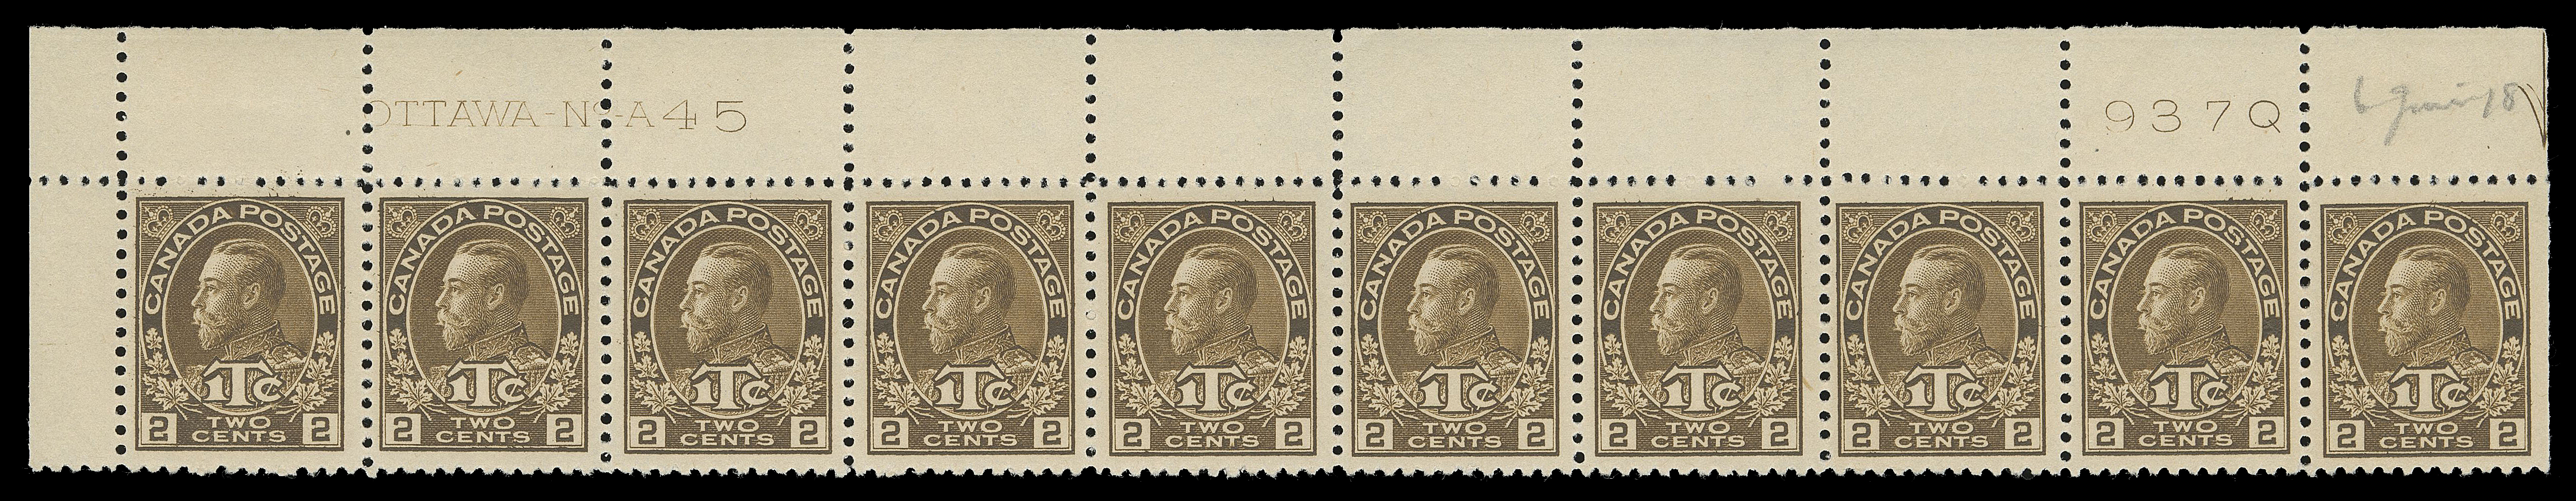 ADMIRAL STAMPS  MR4,A choice, well centered upper left Plate 45 strip of ten with printing order "937Q" at right, hinged in selvedge and on straight edged stamp, natural gum skip on fifth stamp, nine stamps NH, VF (Unitrade cat. $1,120)